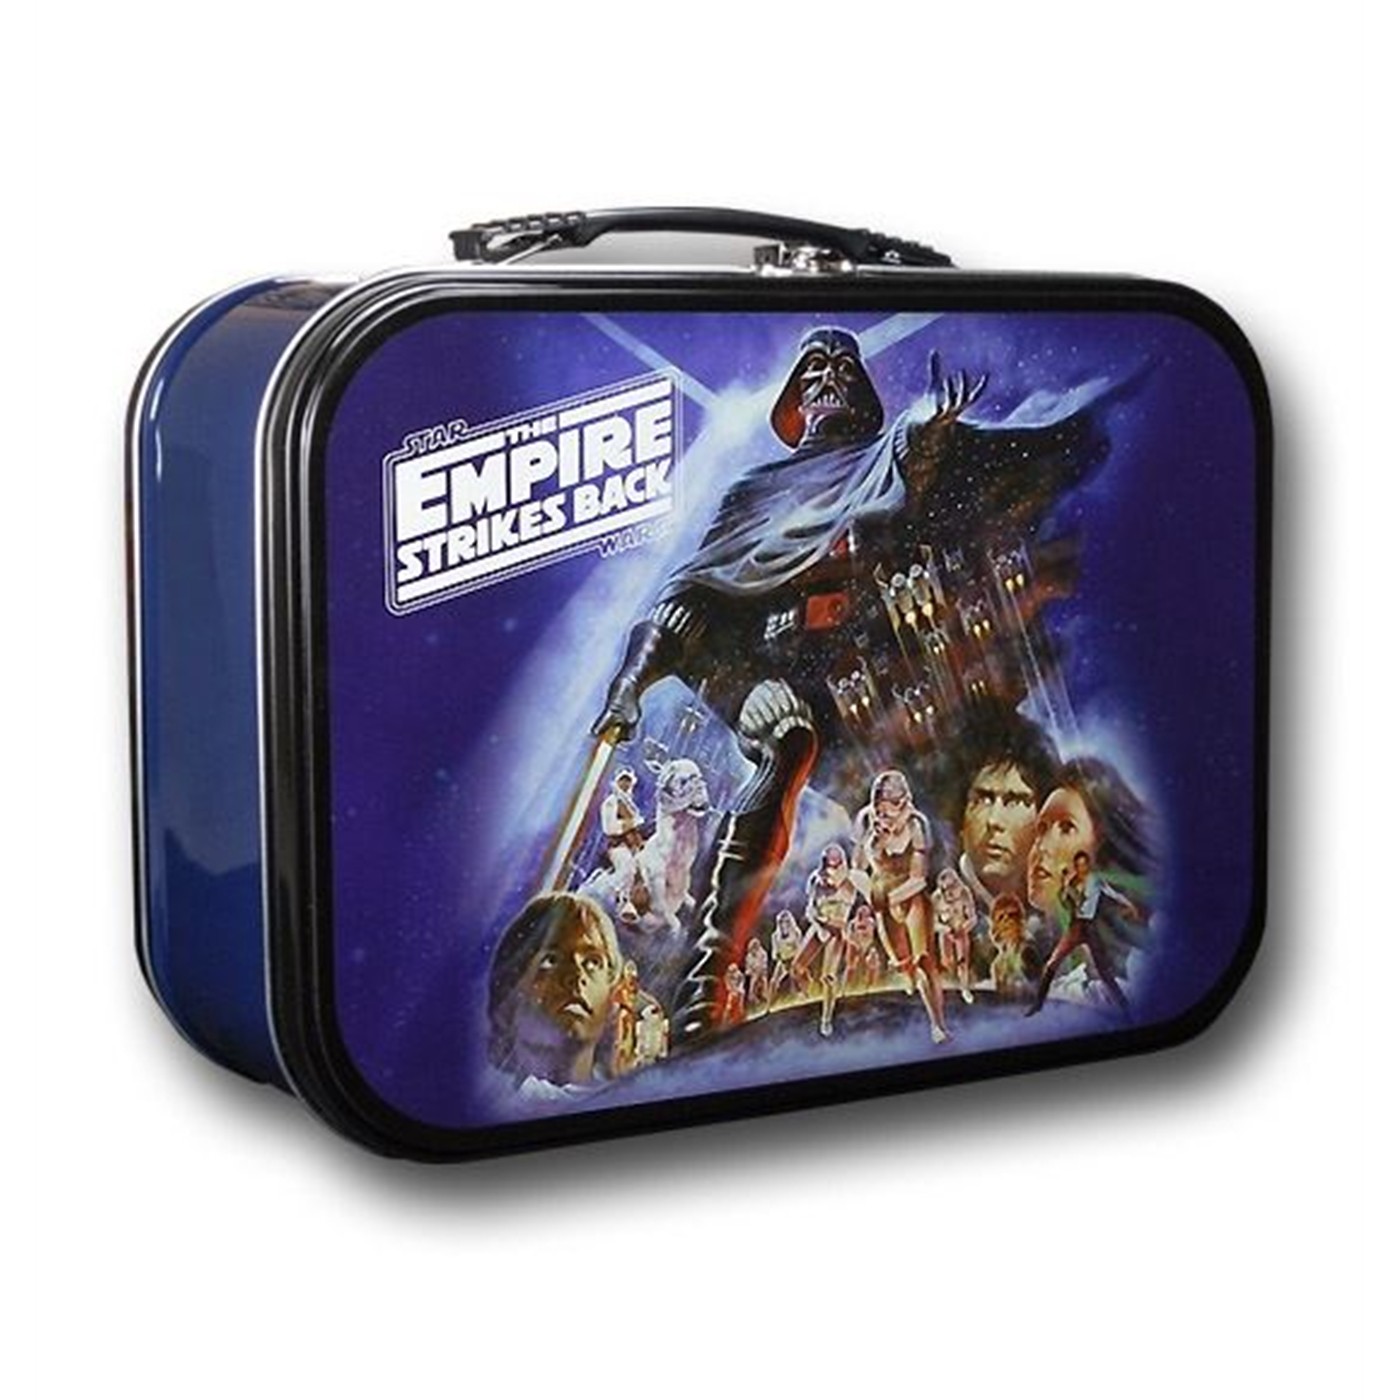 Star Wars Empire Strikes Back Large Lunchbox